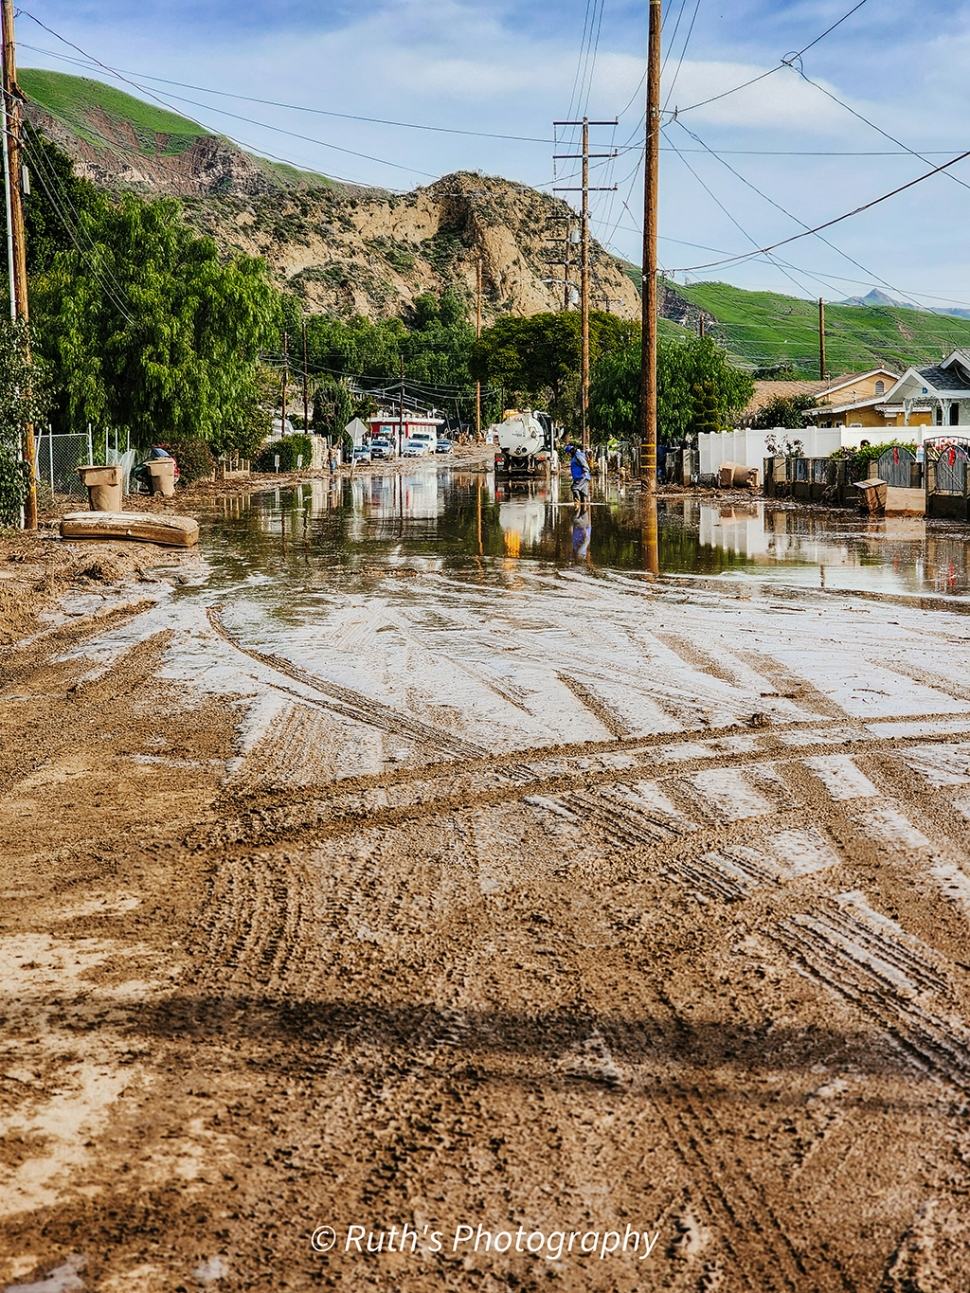 Above and below are pictures of Piru after last week’s rain storm caused mudslides throughout the town. Photo credit Ruth Nevares, portraitsbyruth.com. https://www.instagram.com/ruthnphotography/